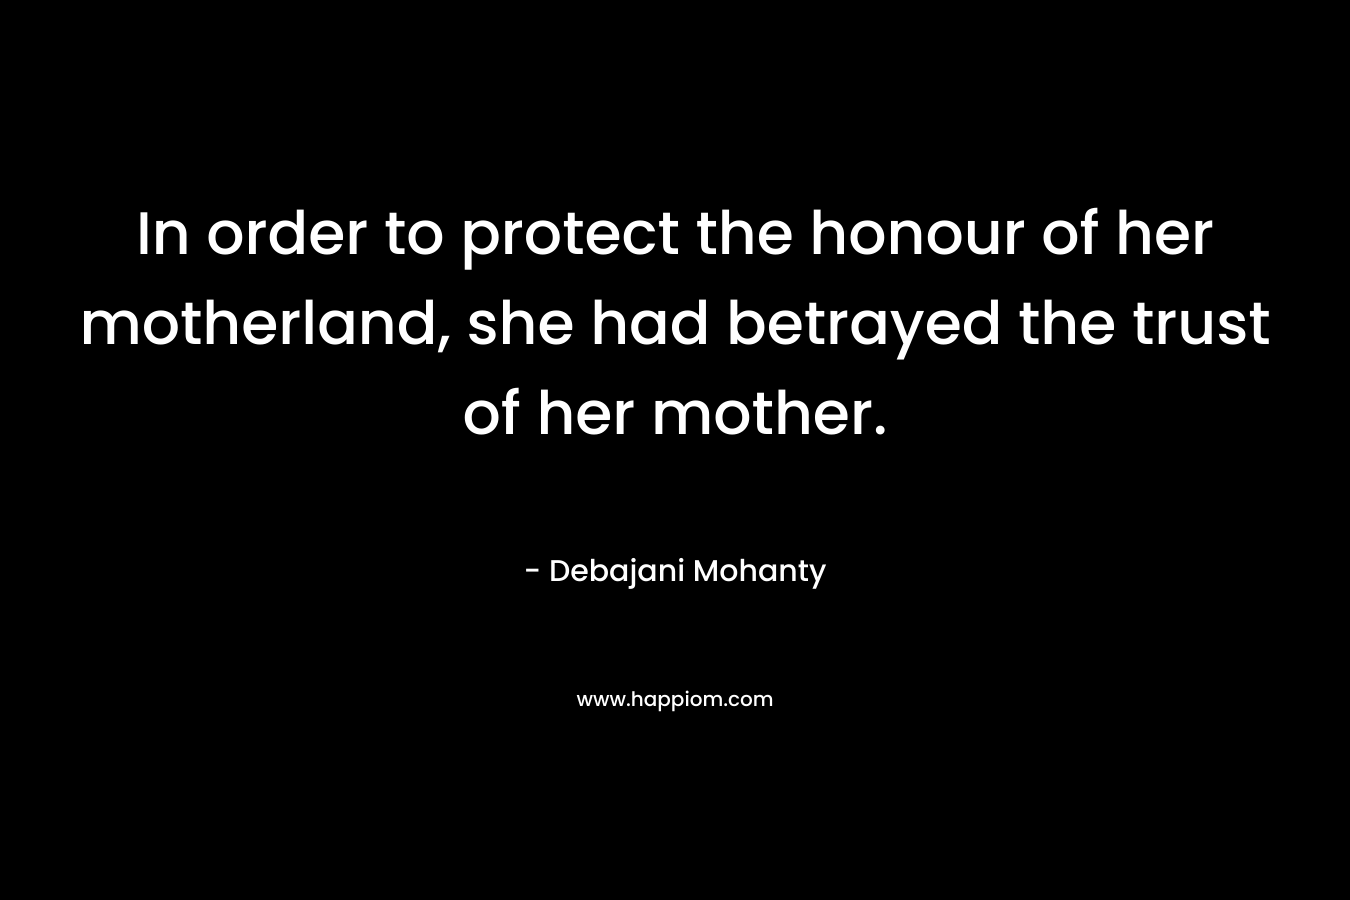 In order to protect the honour of her motherland, she had betrayed the trust of her mother.